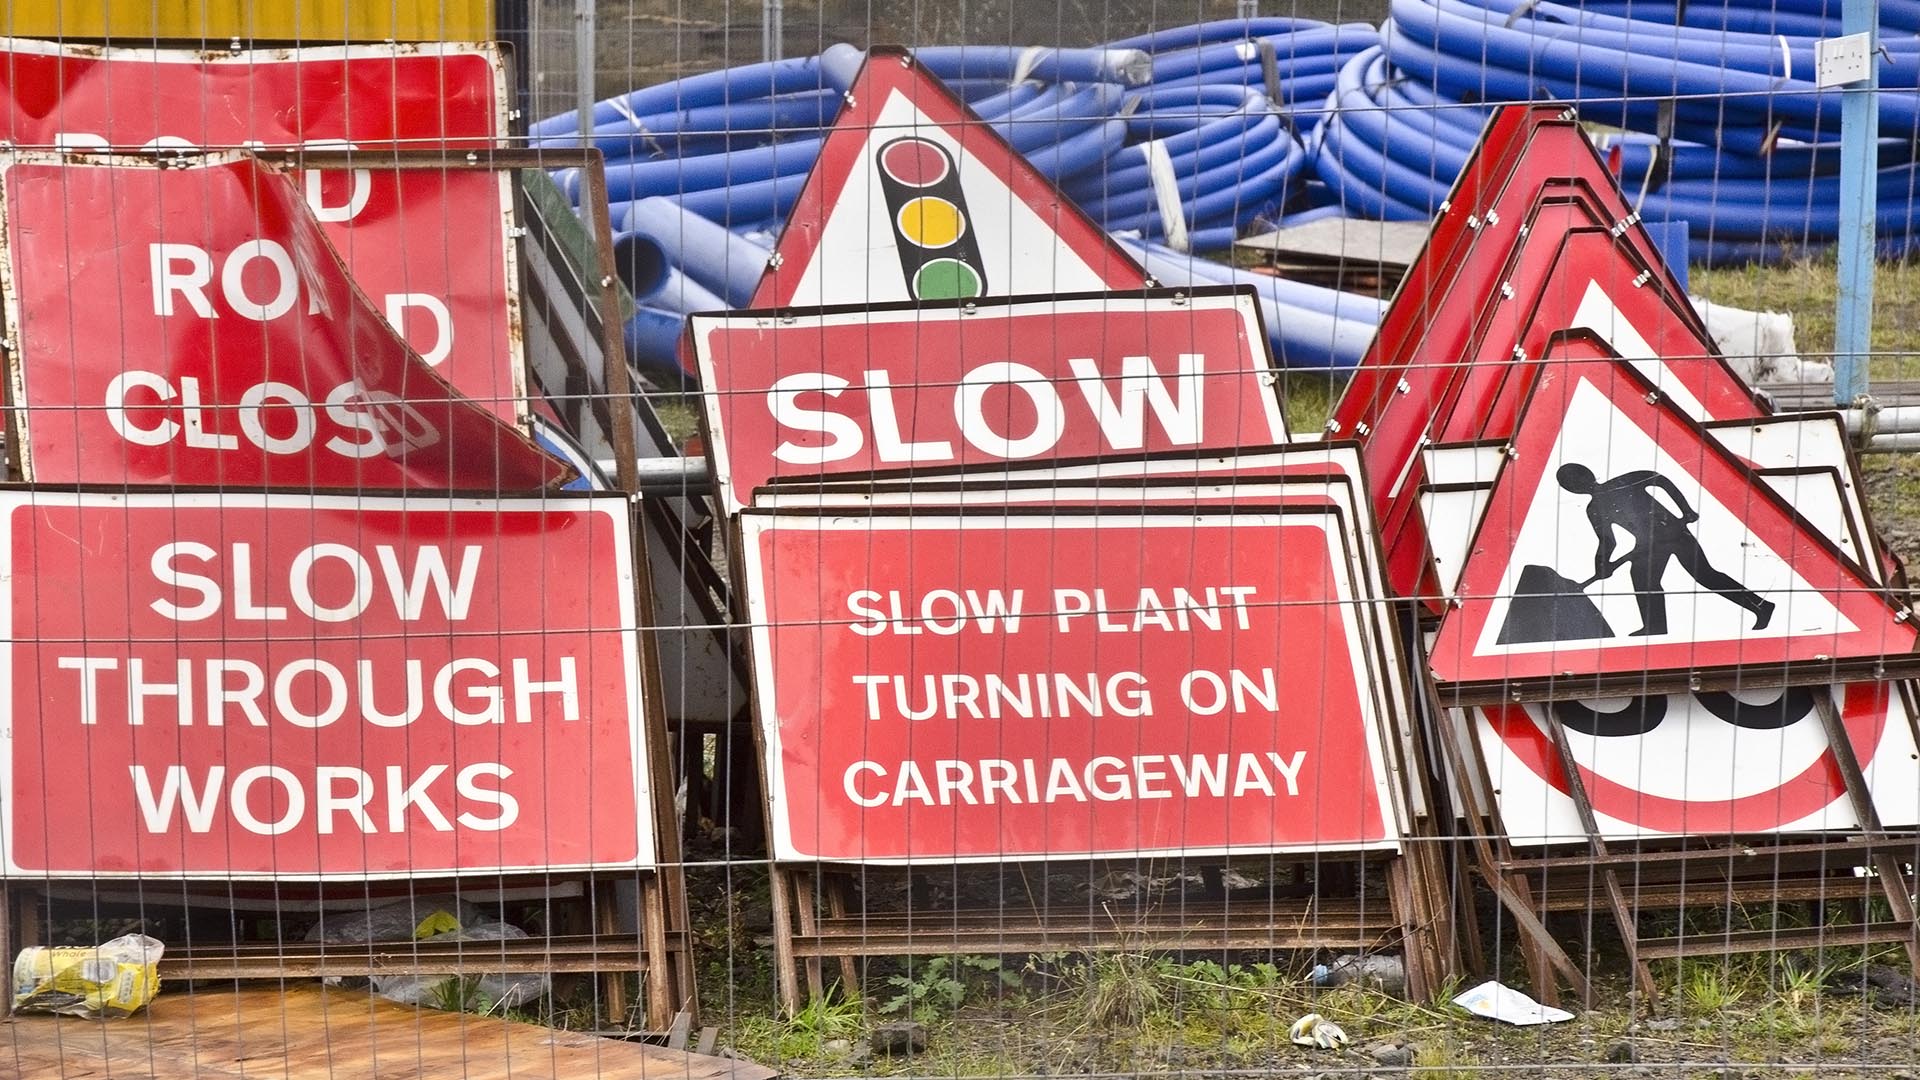 Campaign to sort road signs